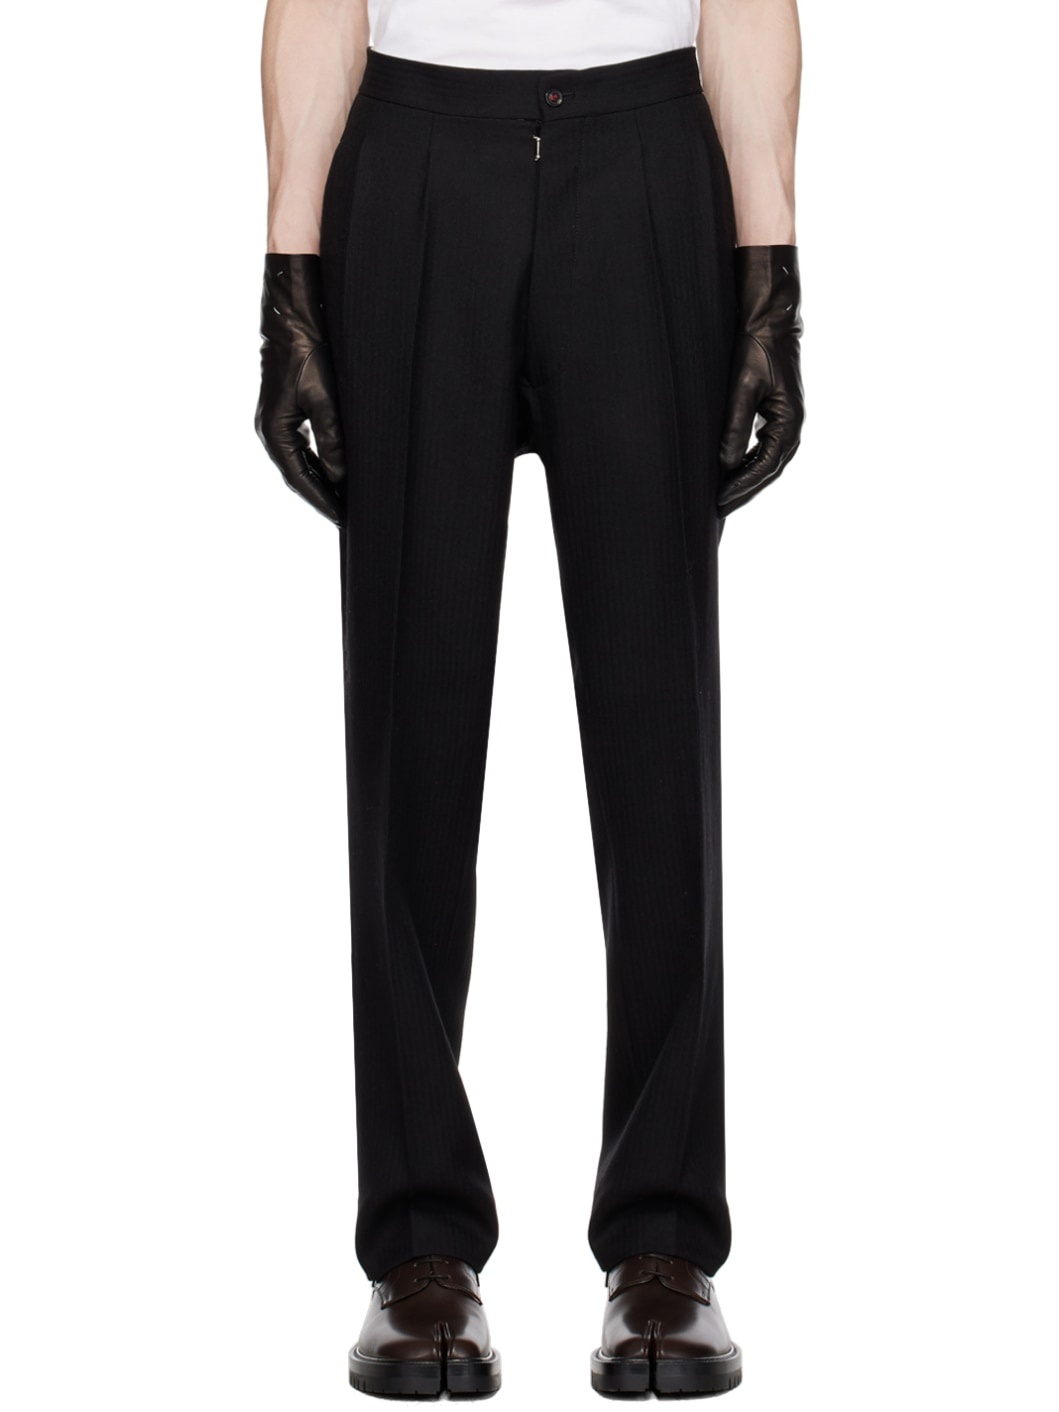 Black Pleated Trousers - 1